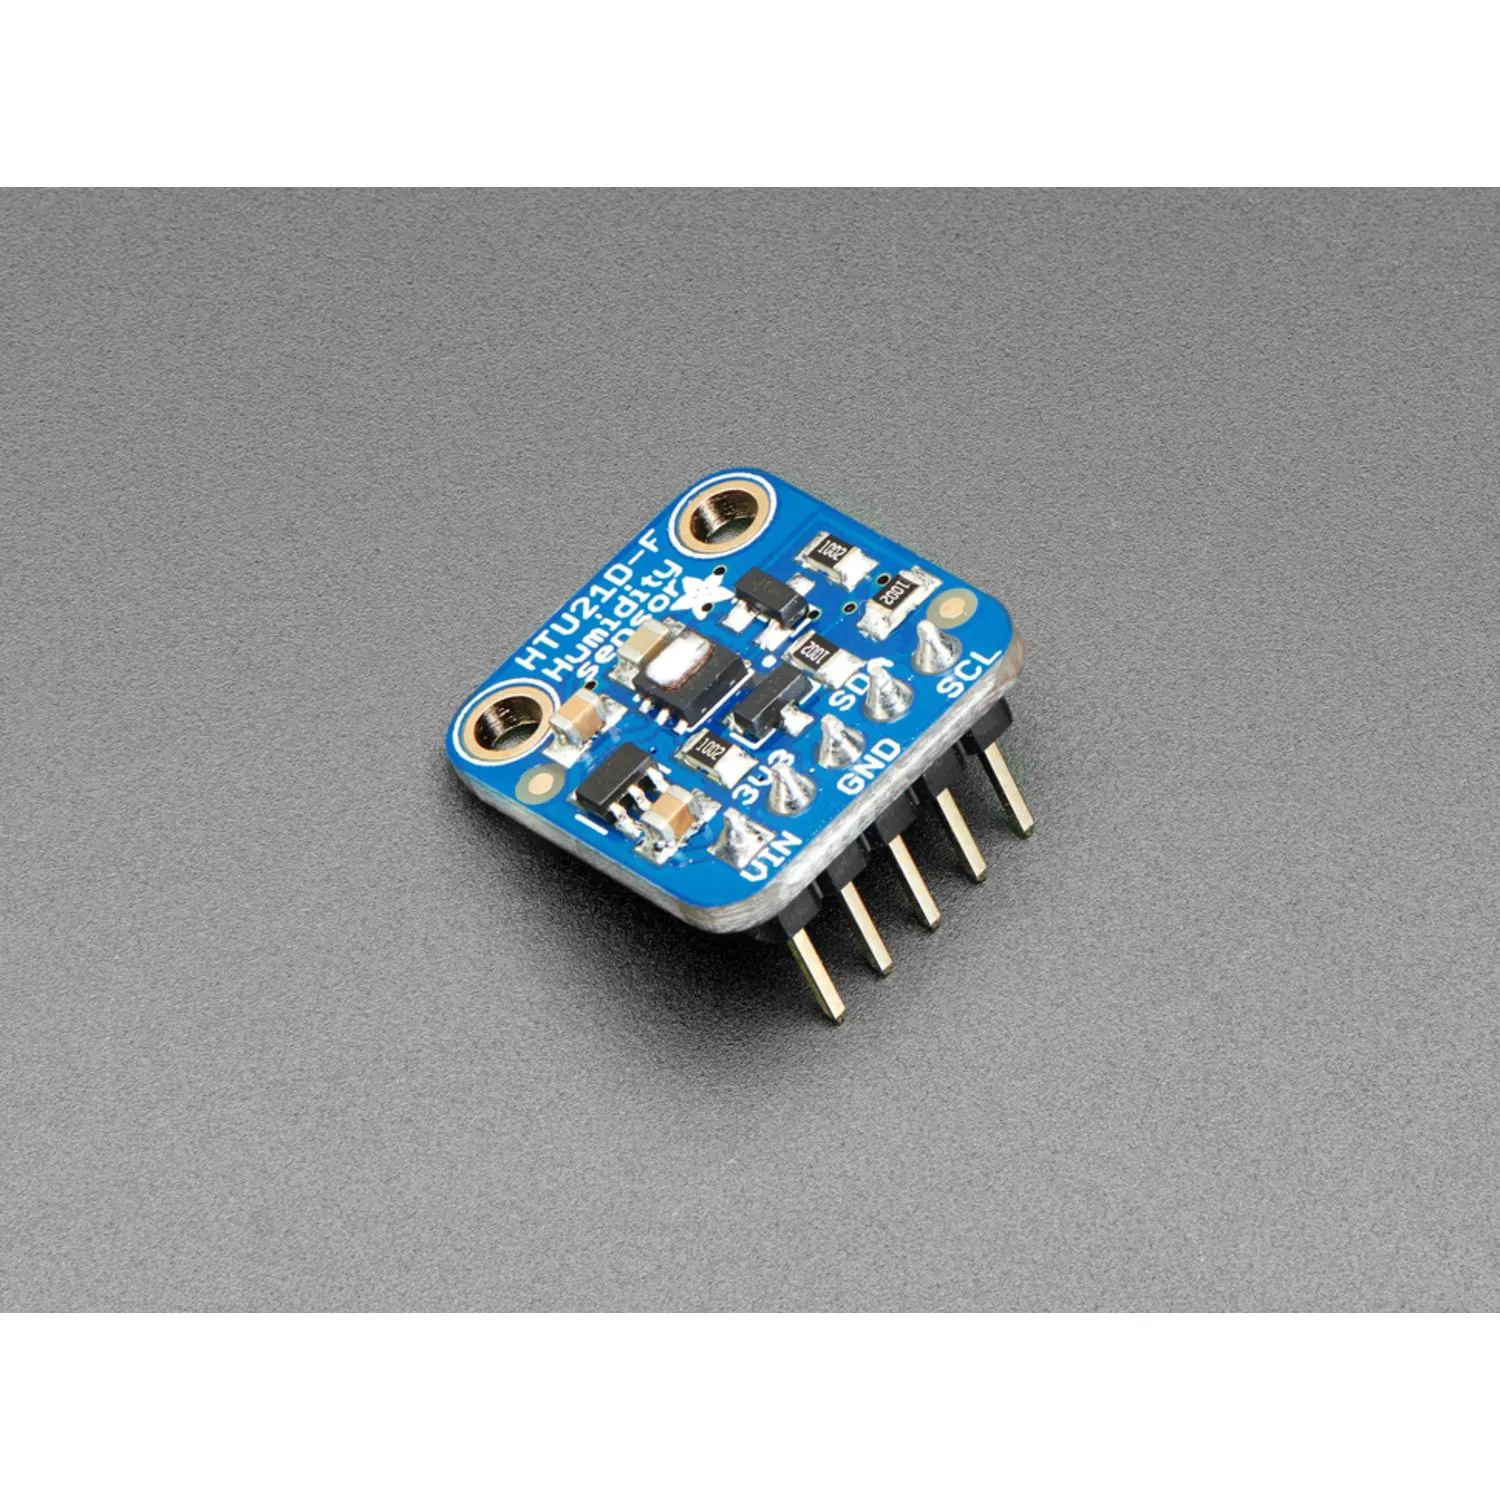 Photo of Adafruit HTU21D-F Temperature  Humidity Sensor Breakout Board - with or without Headers